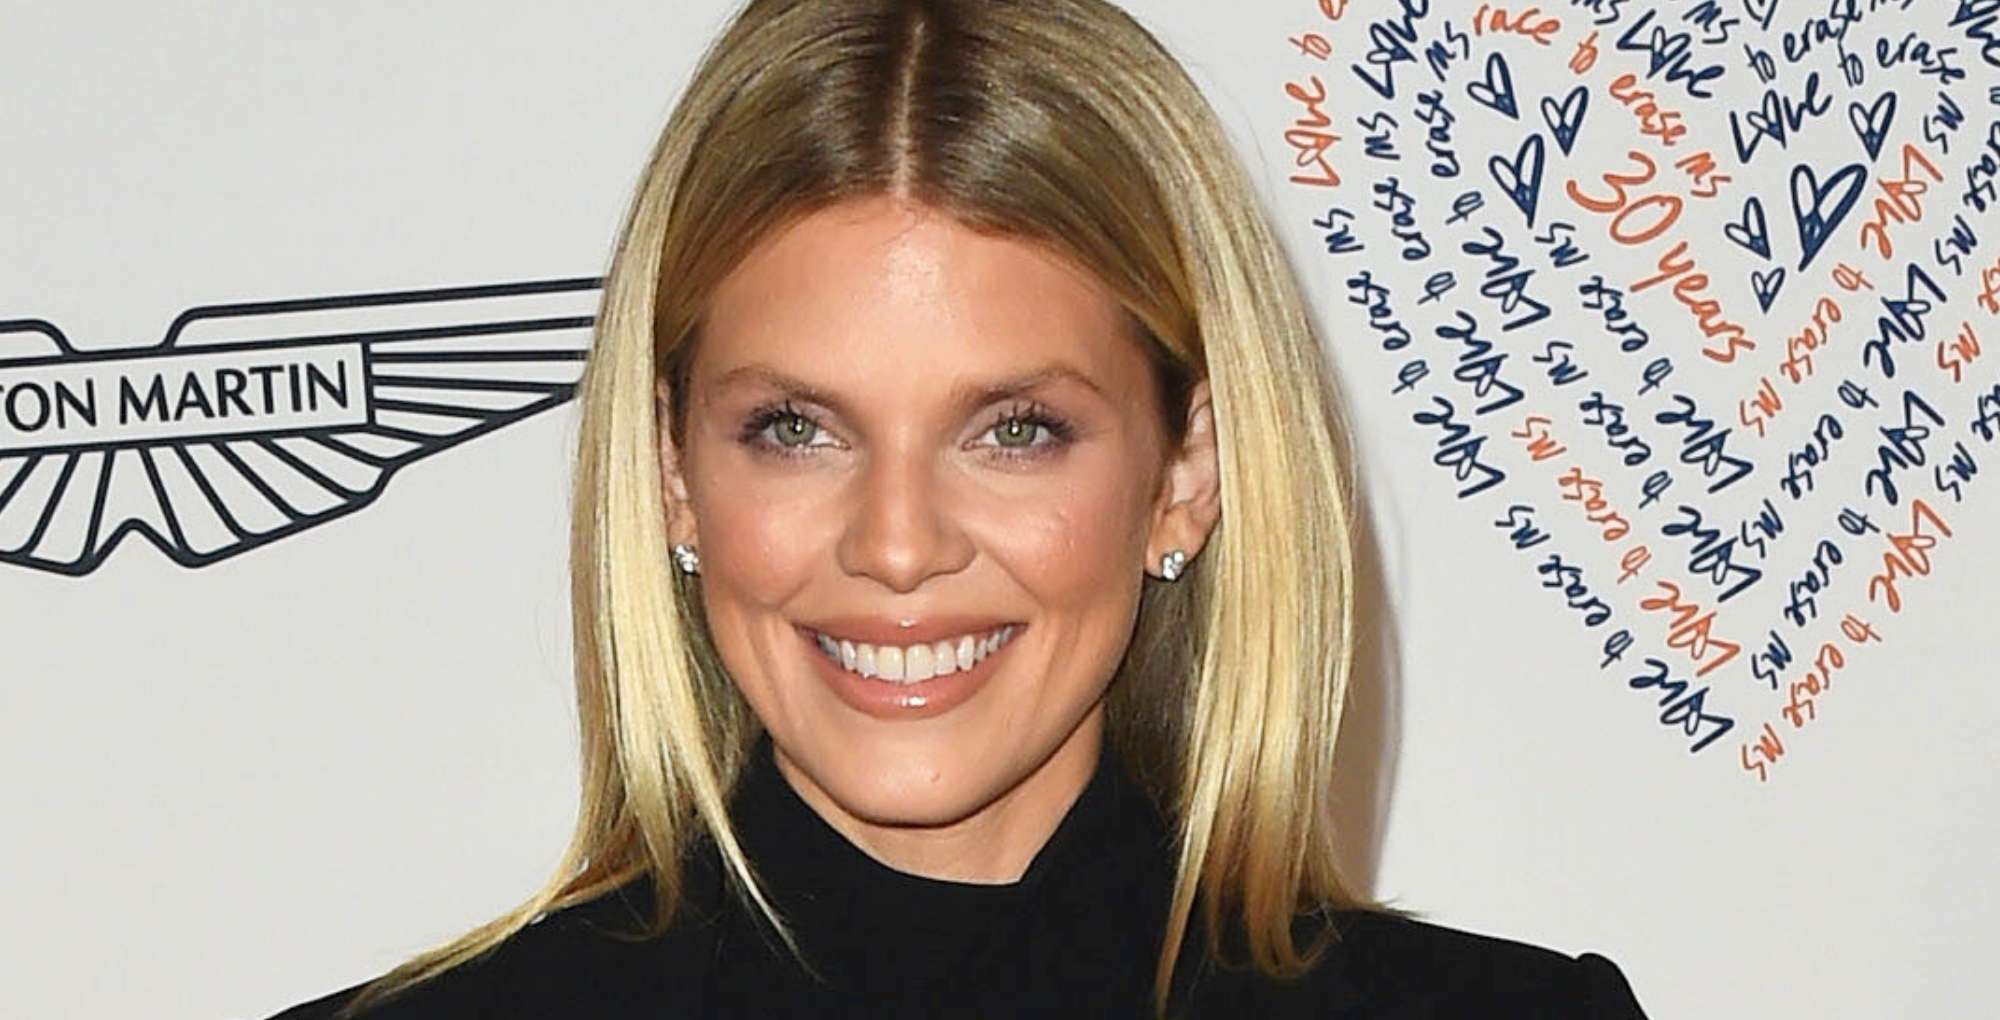 days of our lives star annalynne mccord.